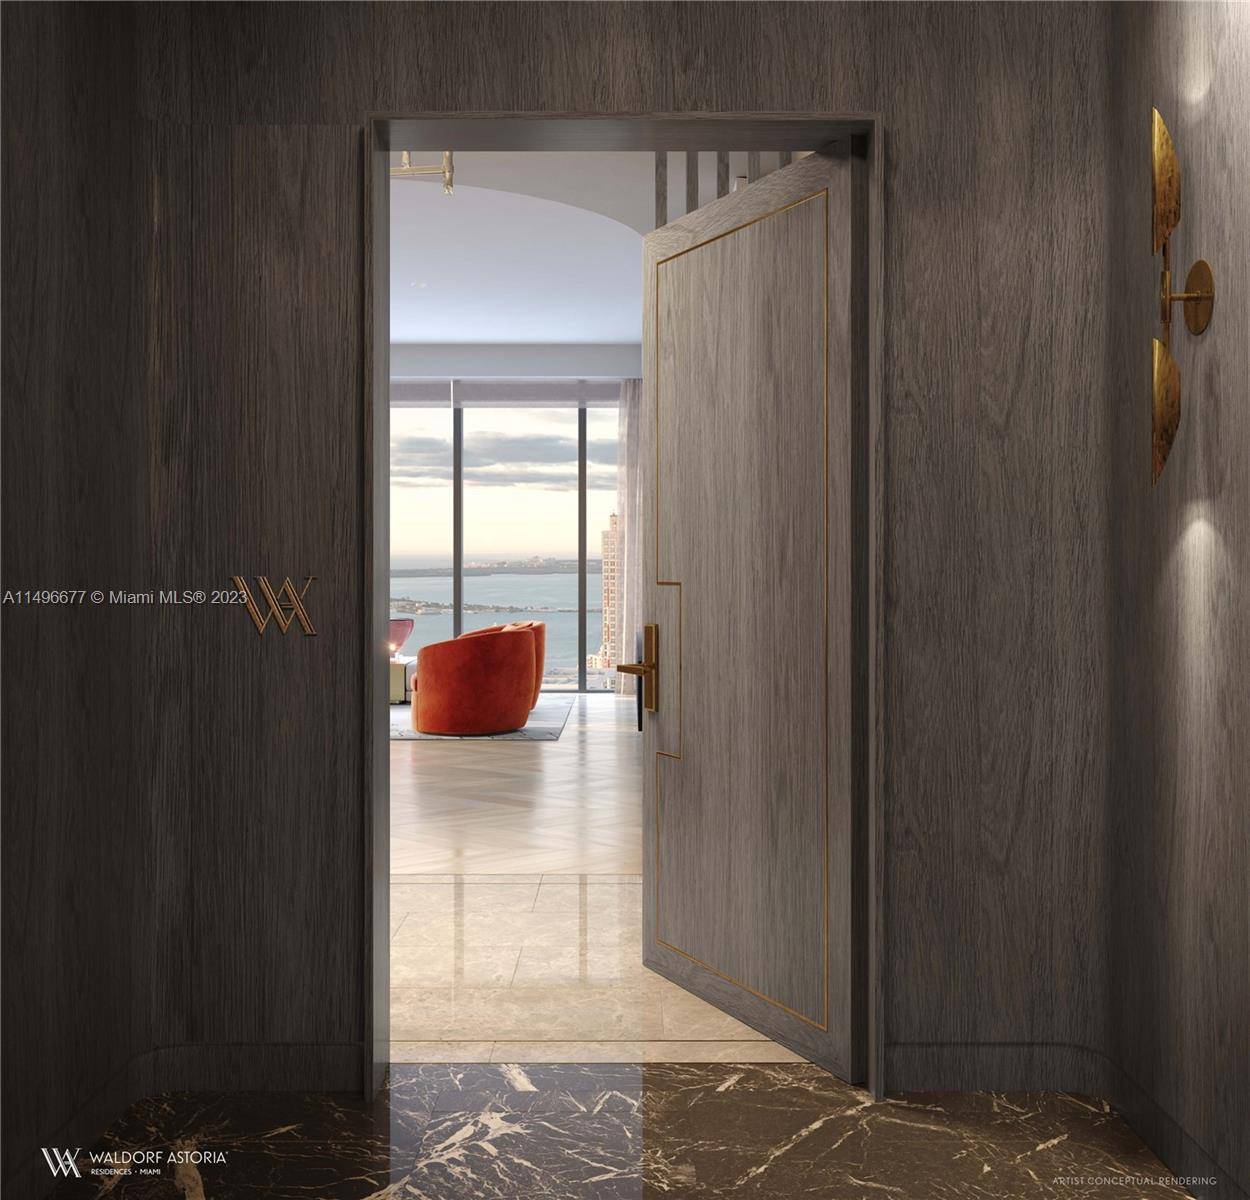 Waldorf Astoria Residences Miami offers an experience in transcendence, an exclusive lifestyle offering embedded within a legacy brand that has stood the test of time.